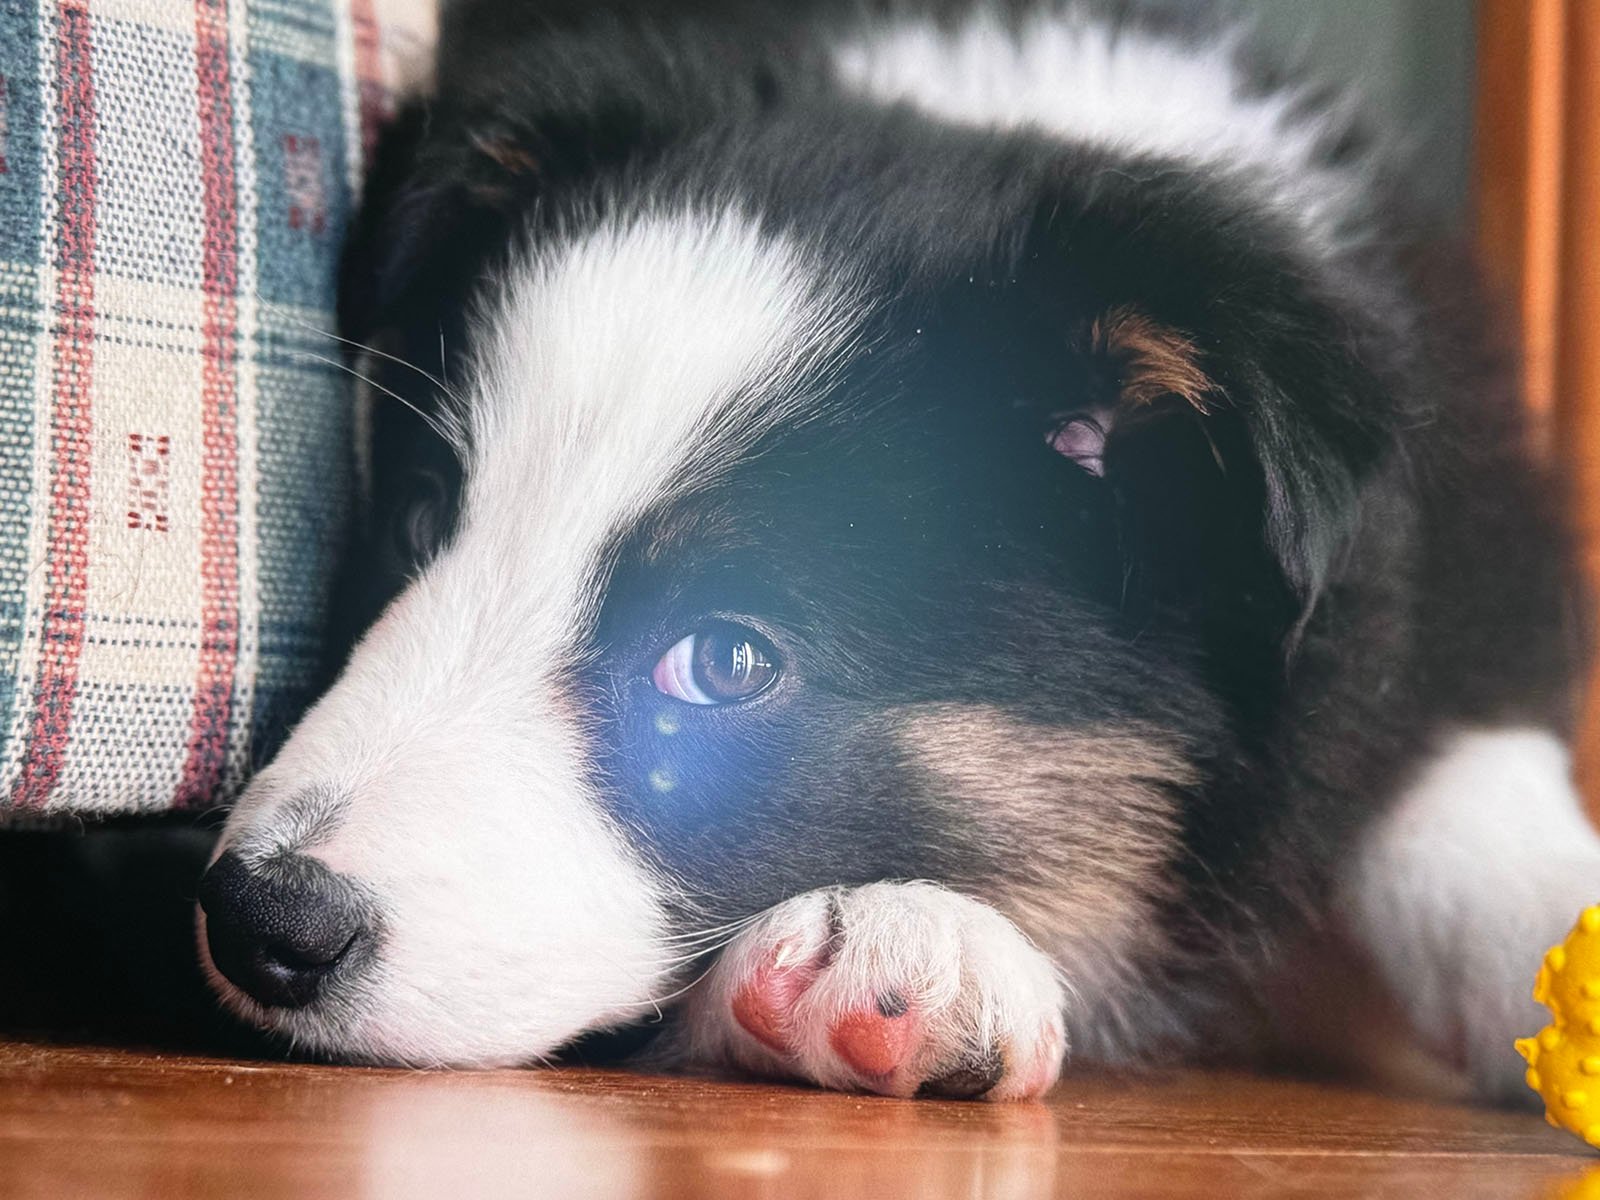 A black and white puppy with one blue eye rests its head on the ground near a plaid fabric-covered surface. It looks directly at the camera, appearing calm and relaxed, with its front paw stretched out in front. There is a yellow toy in the background.